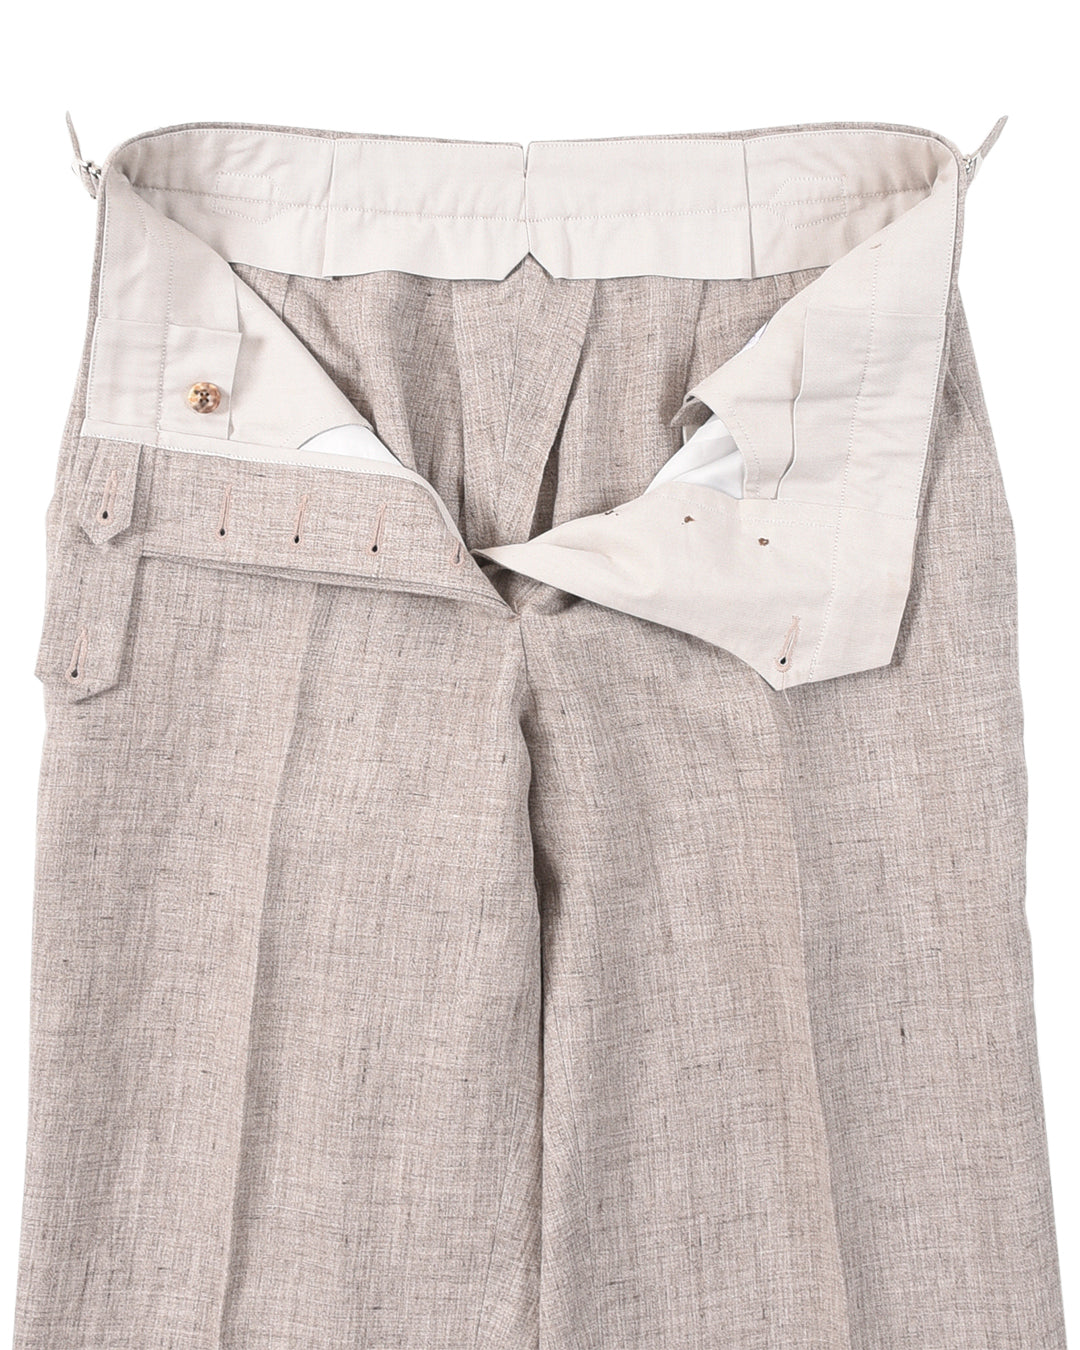 Open front view of custom linen pants for men by Luxire in light brown